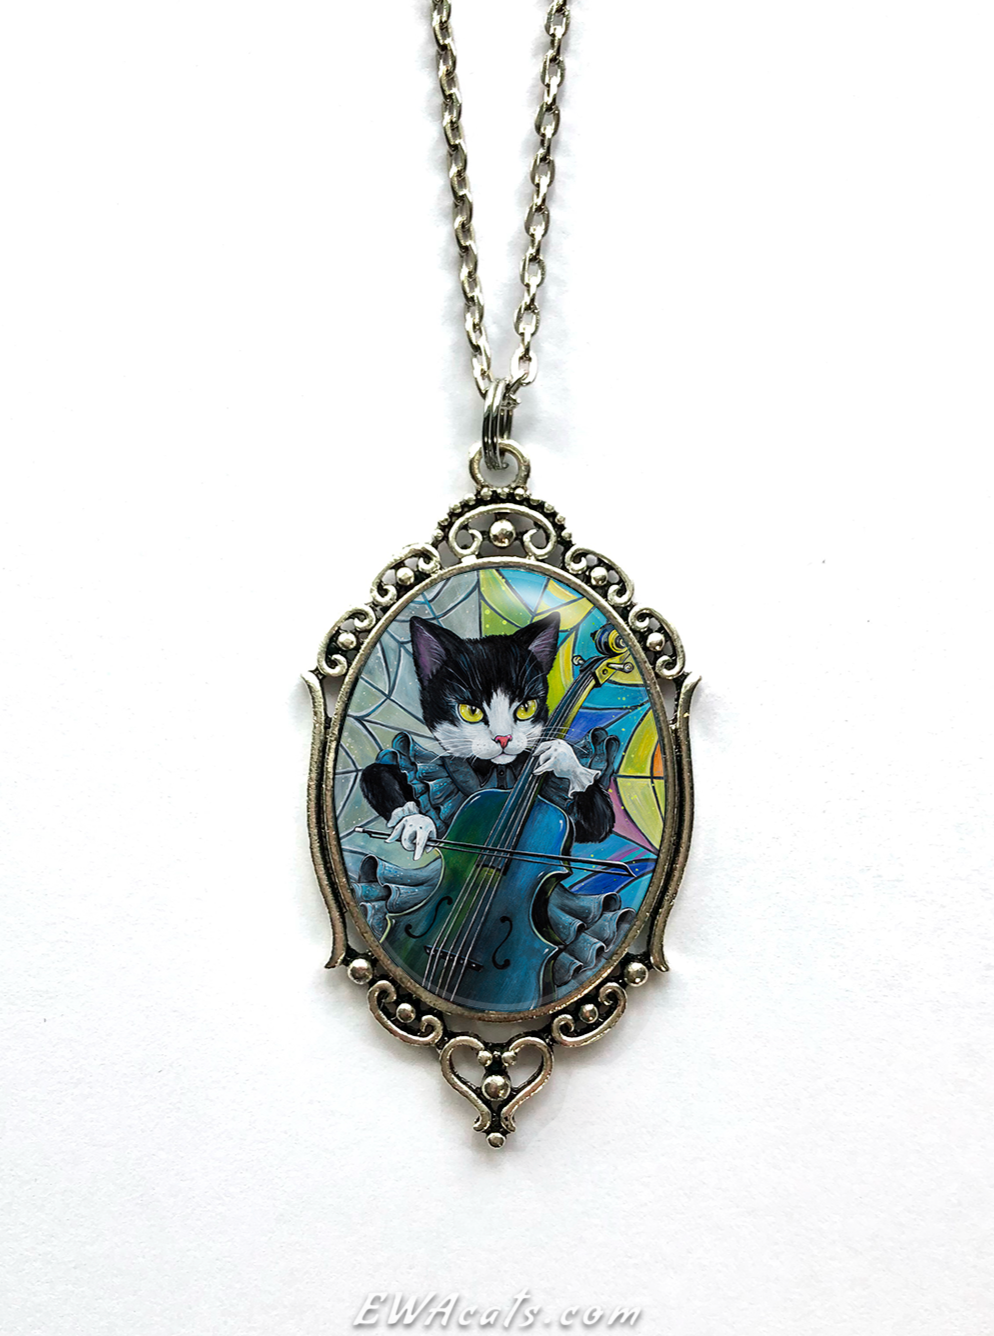 Necklace "Wednesday Cattams"